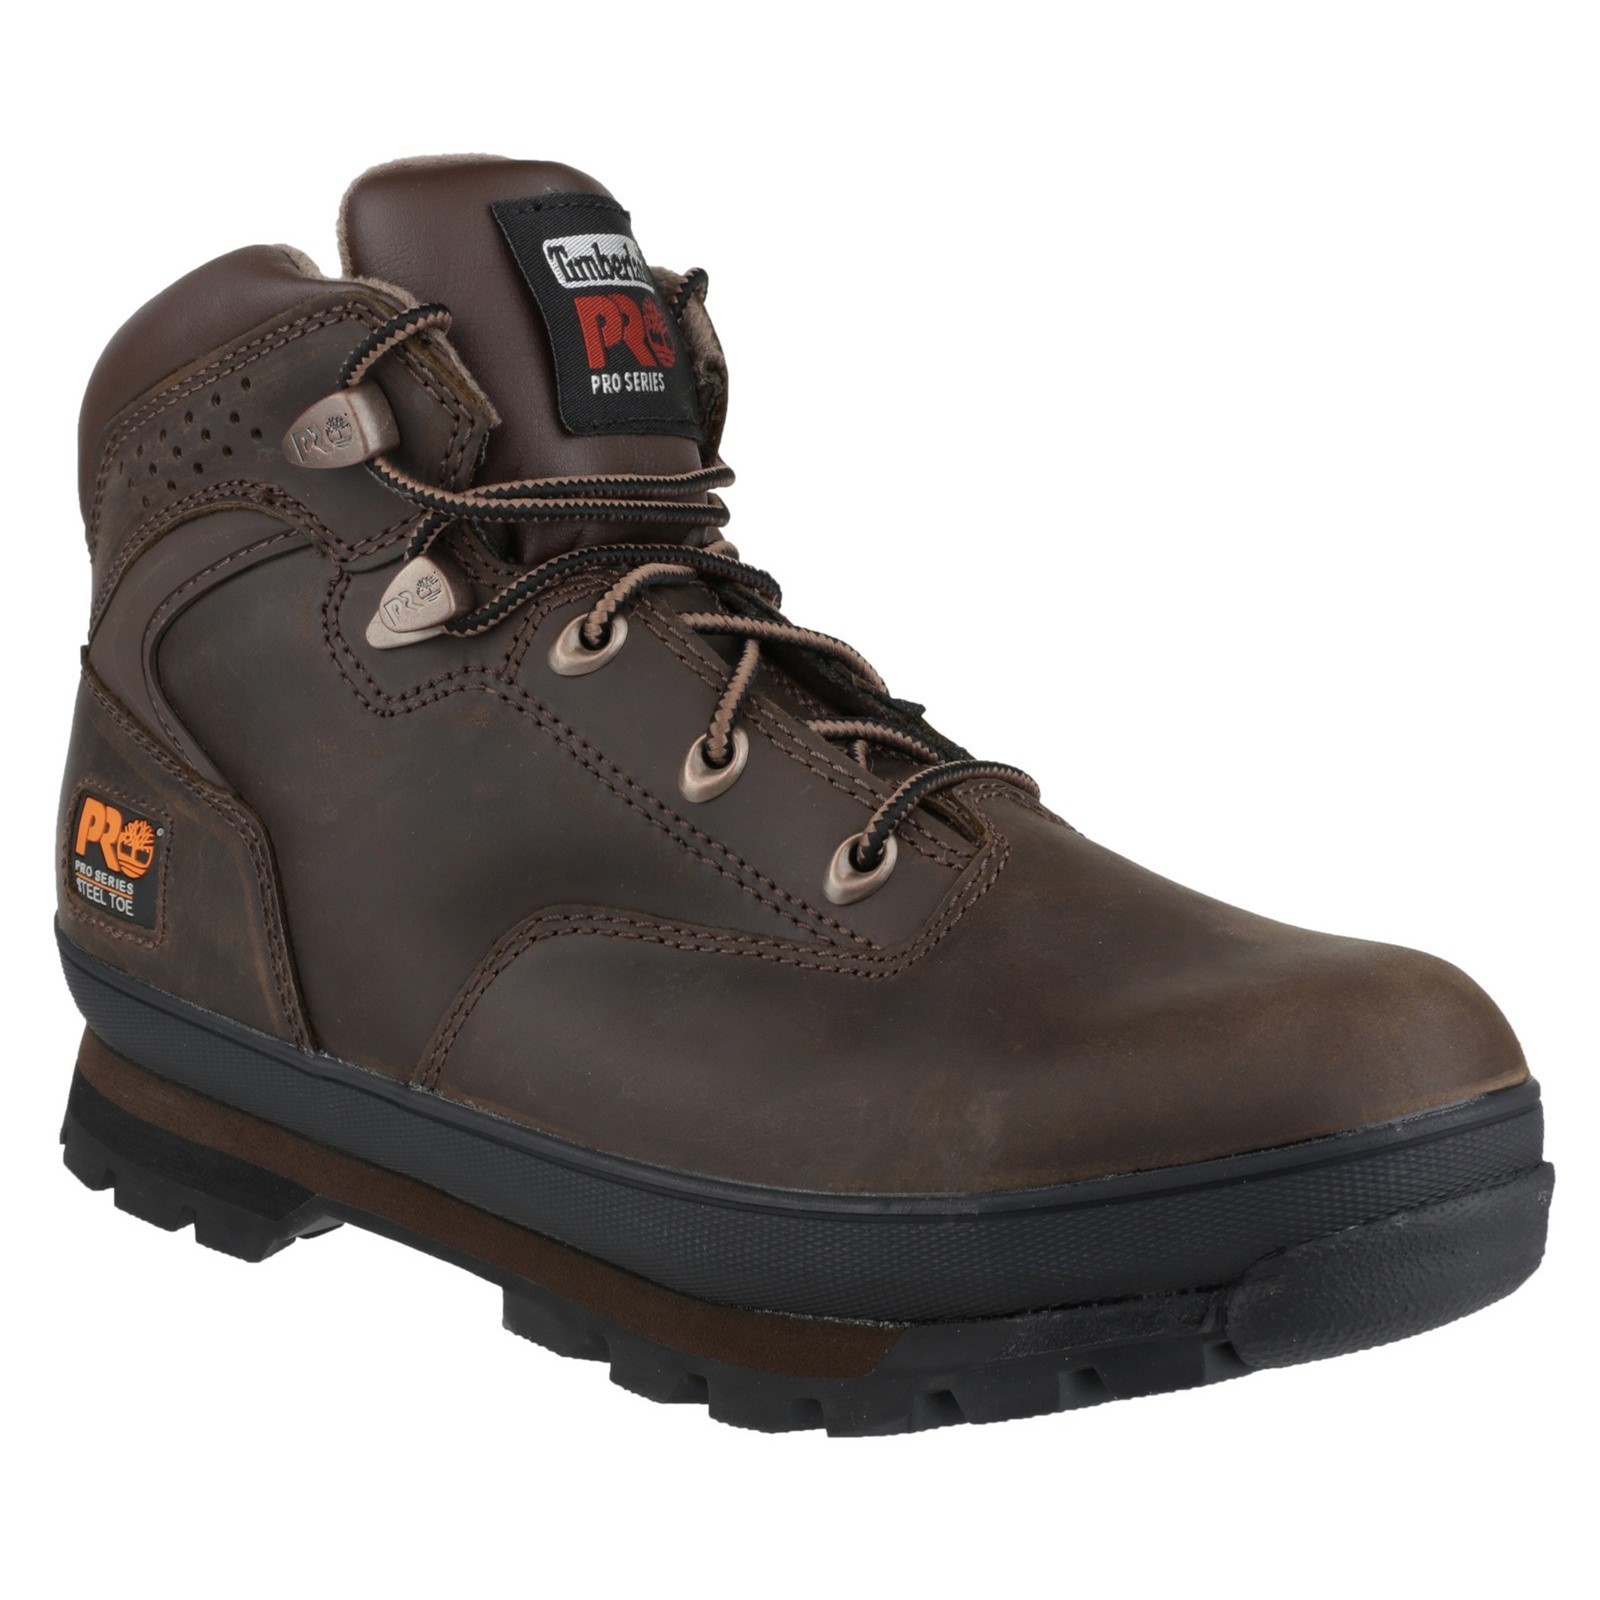 Euro Hiker Lace-up Safety Boot